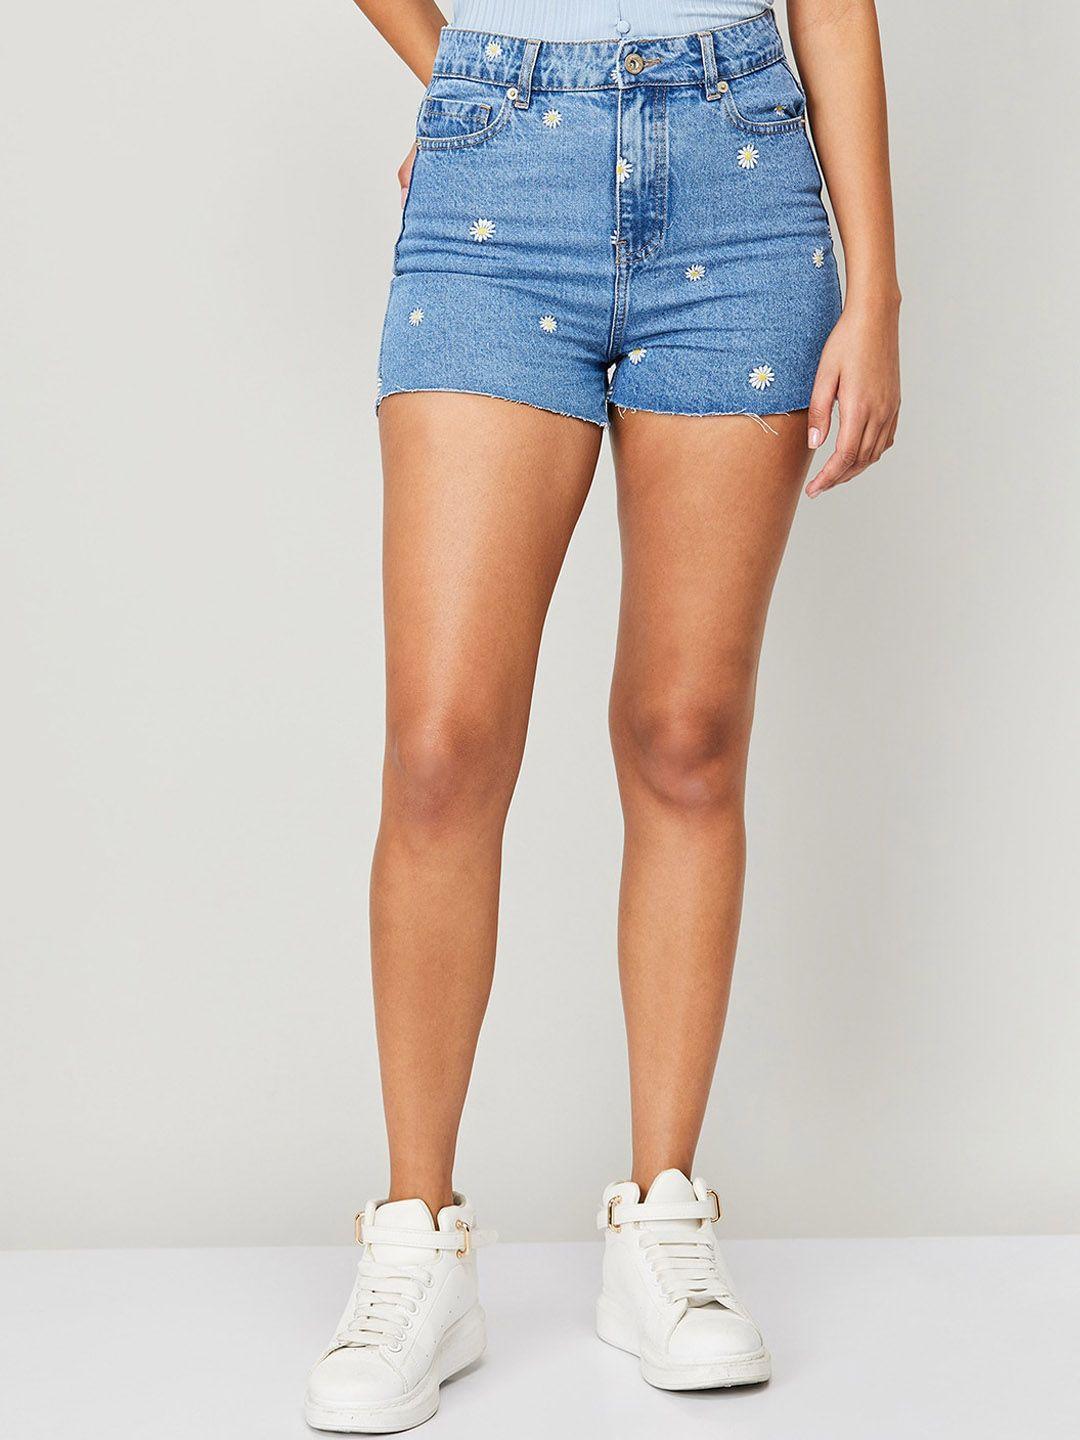 ginger-by-lifestyle-women-washed-printed-denim-shorts